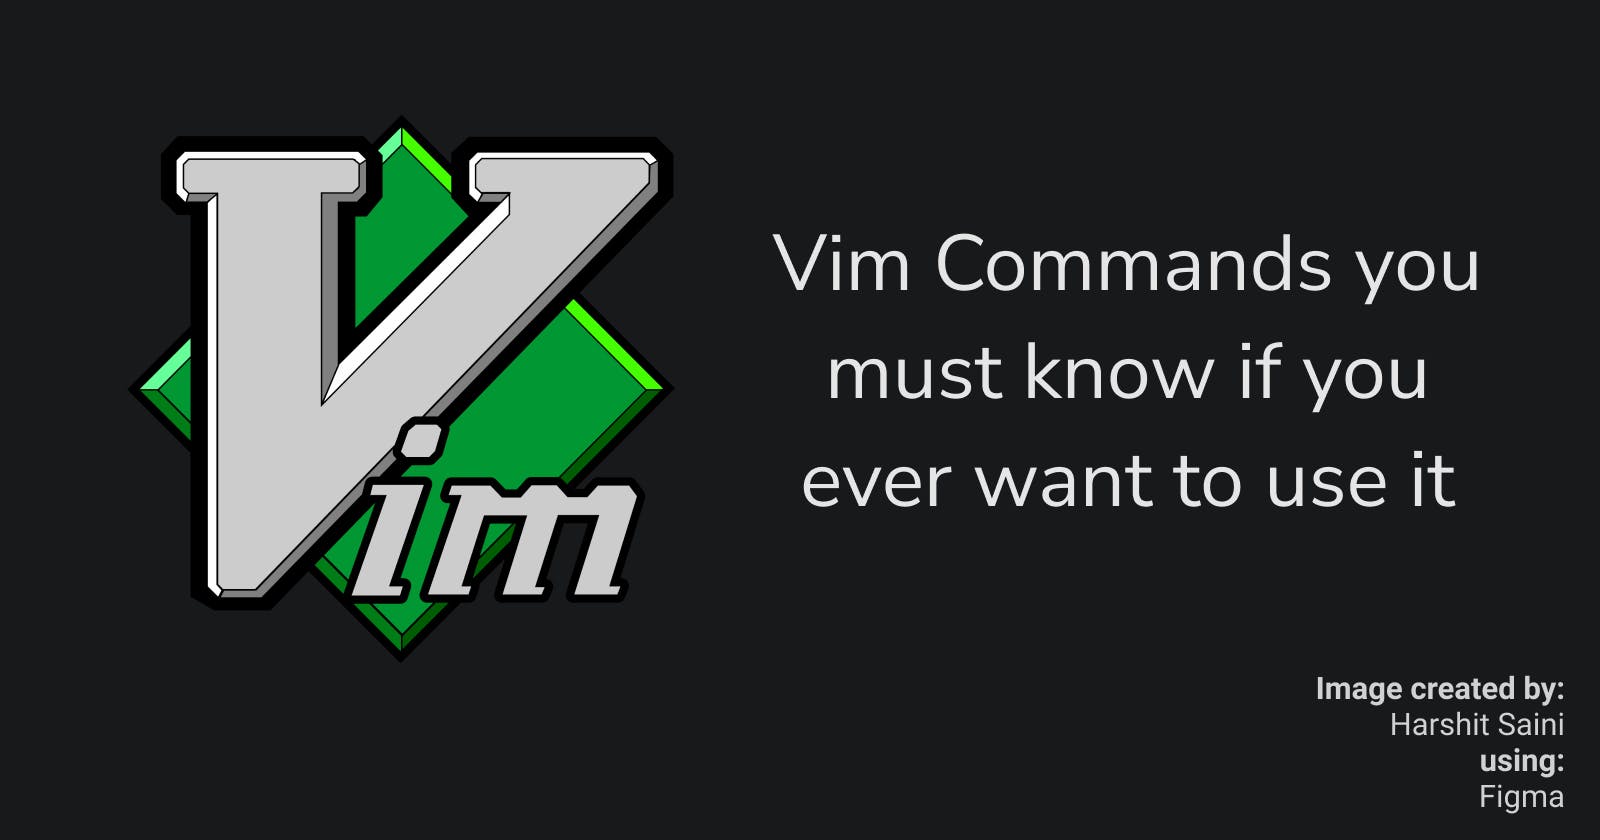 Vim Commands you must Know